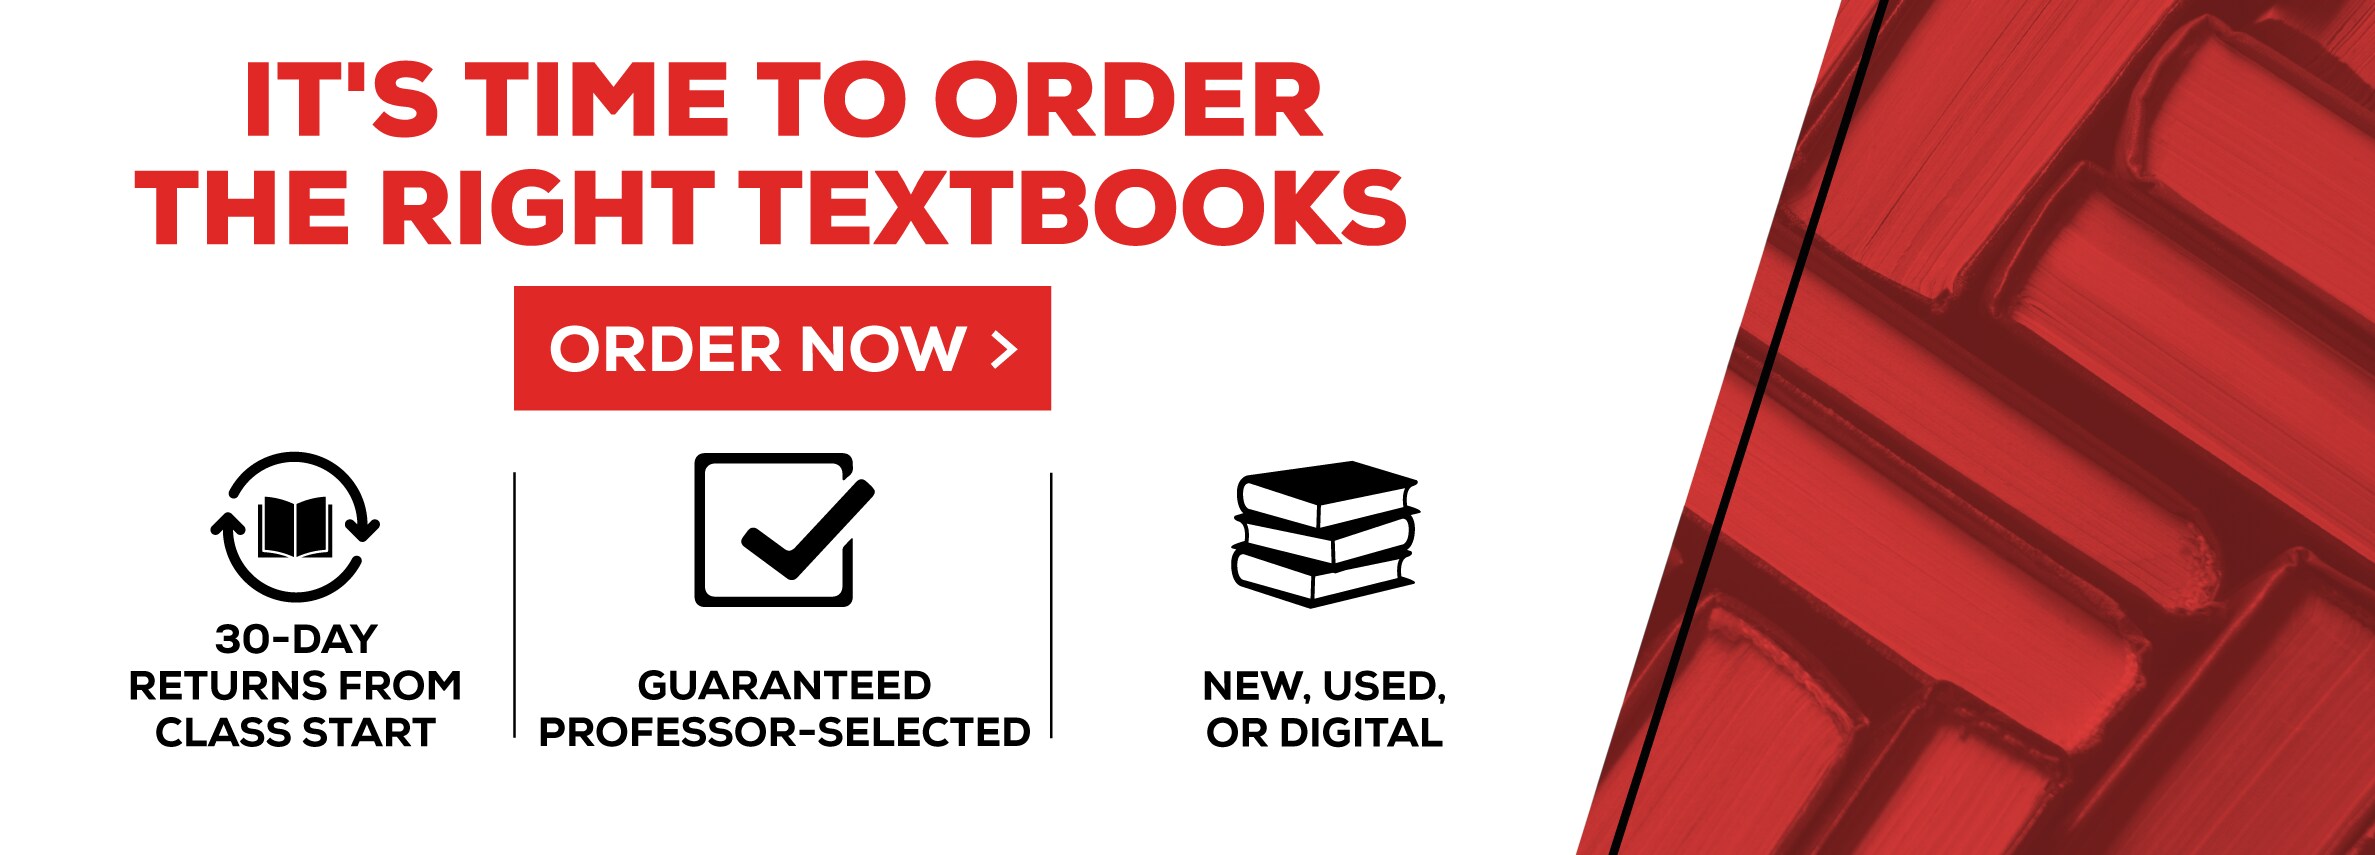 ItÃ¢â‚¬â„¢s time to order the right textbooks. Order now. 30-day returns from class start. Guaranteed professor-selected. New, Used, or digital.